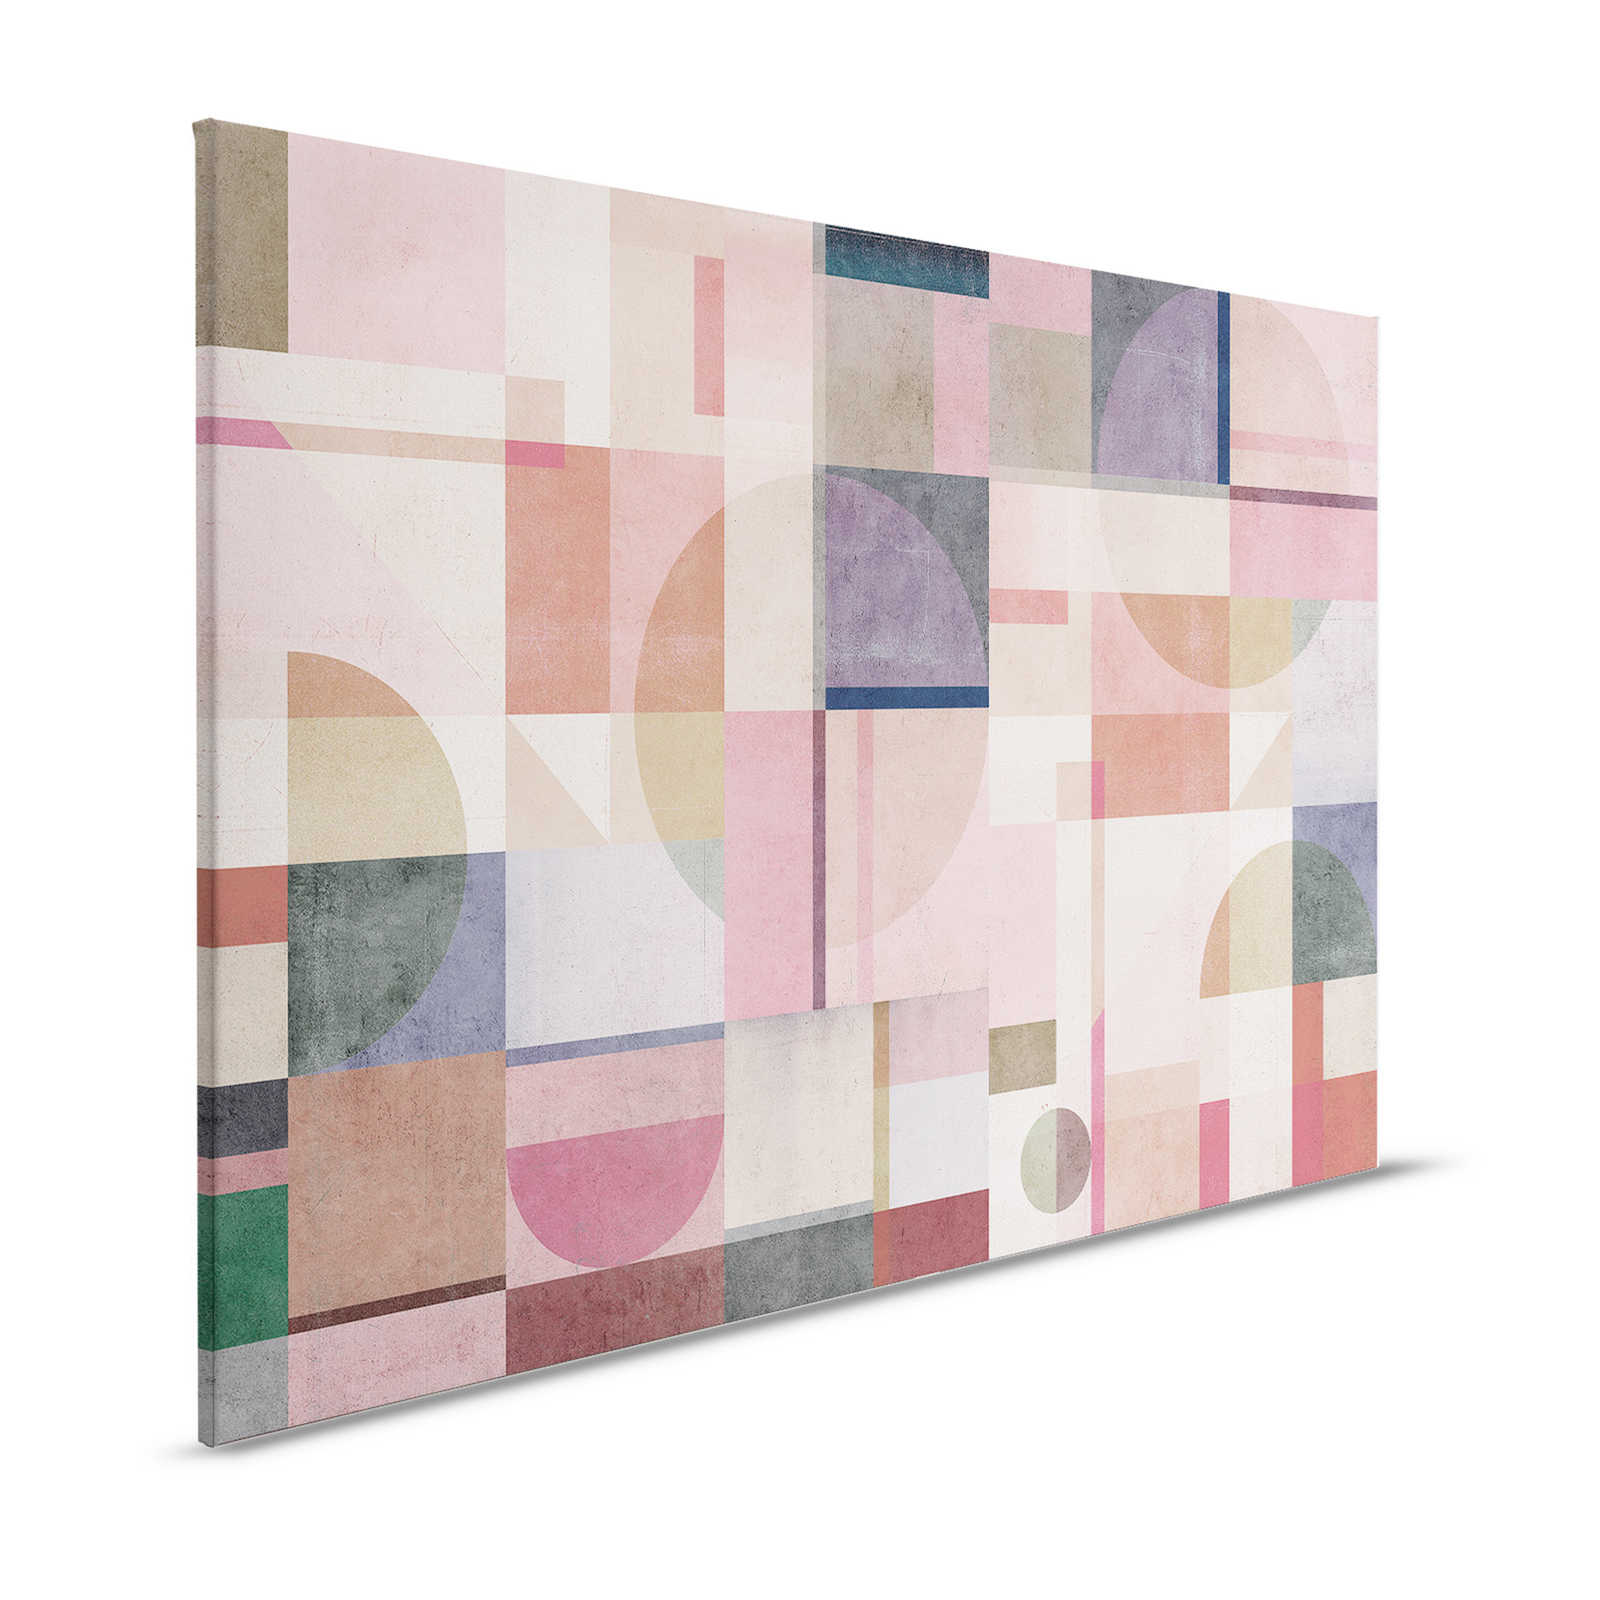 Piazza 2 - Concrete Look Canvas Painting Pink & Green with Graphic Pattern - 1.20 m x 0.80 m
